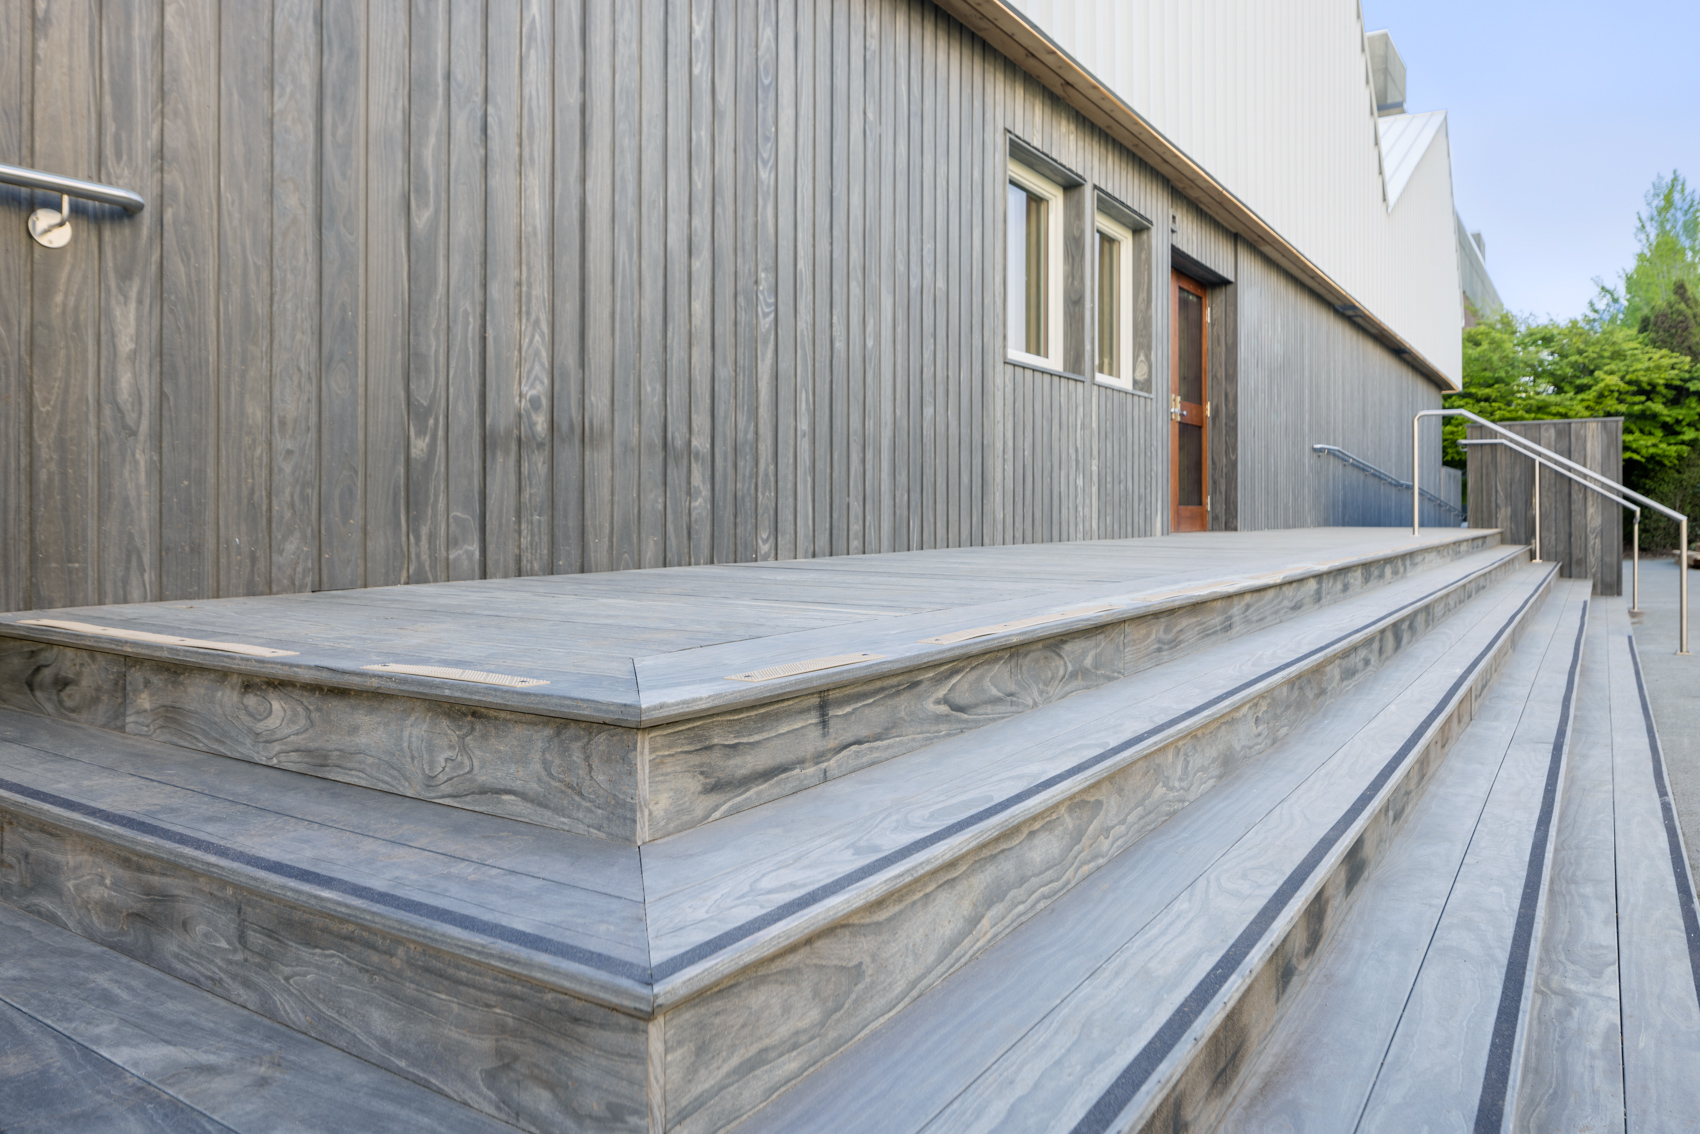 GREY MATTER: Accoya for interior and exterior cladding - reSAWN